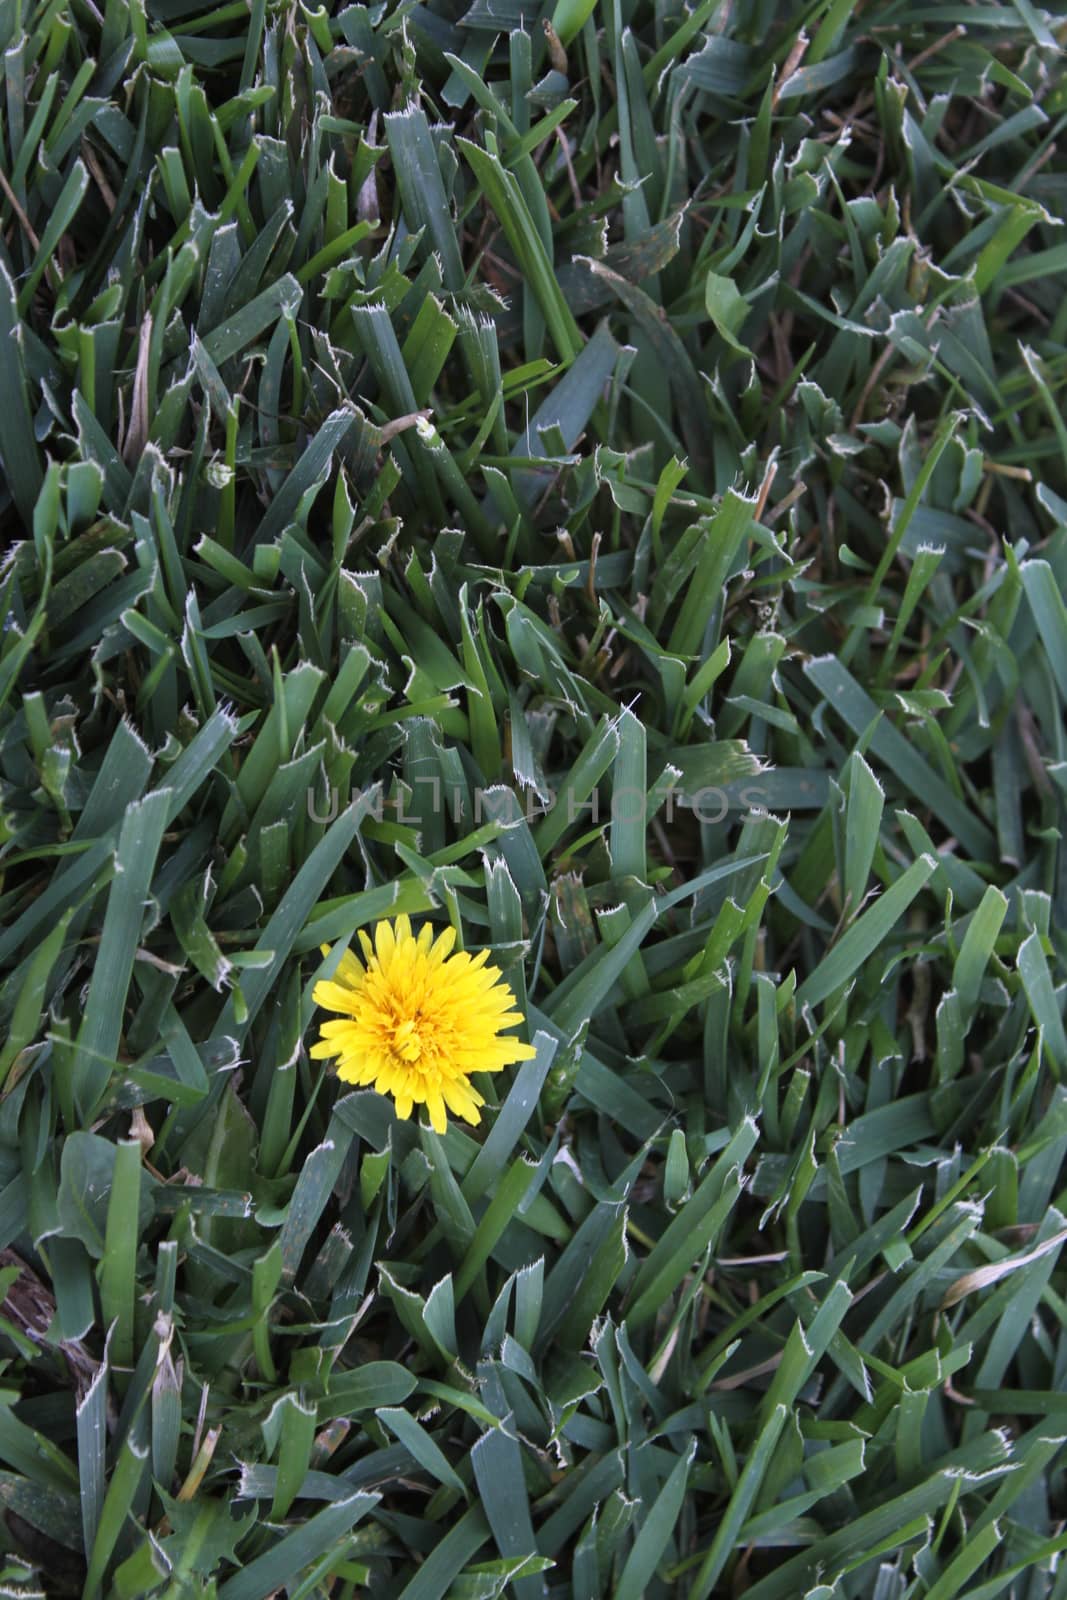 One yellow dandelion in a blanked of green grass.